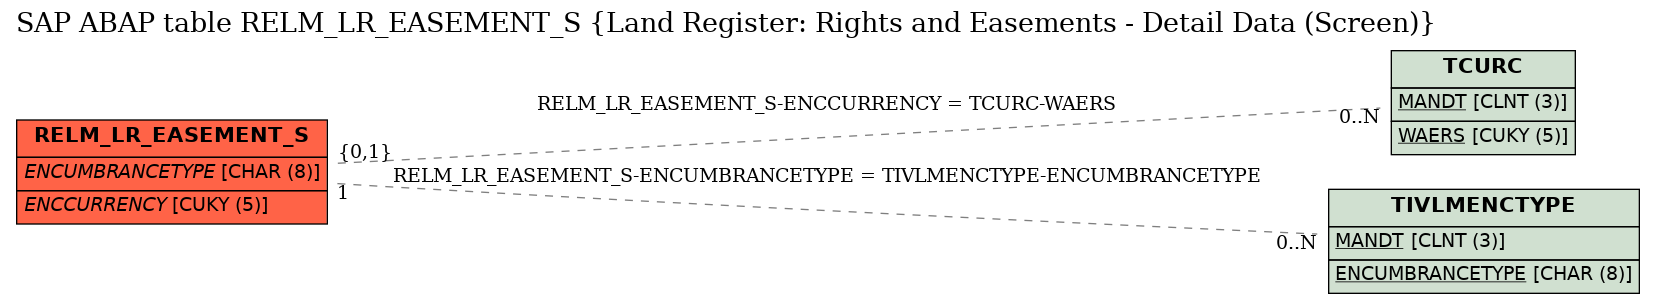 E-R Diagram for table RELM_LR_EASEMENT_S (Land Register: Rights and Easements - Detail Data (Screen))